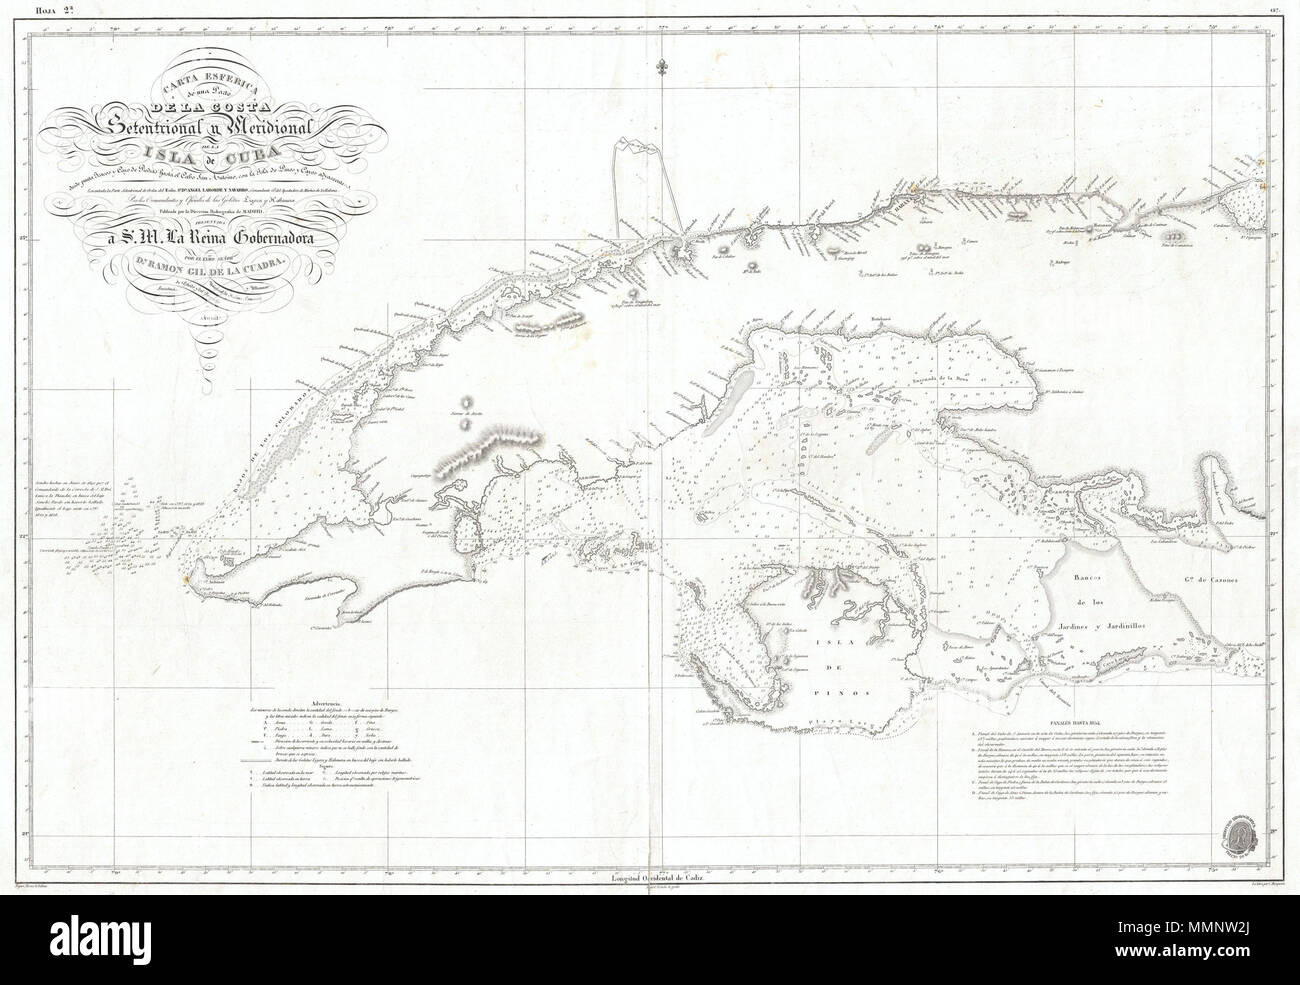 .  English: This is a dramatic and exceptionally rare 1854 nautical chart or map of the western part of Cuba by the Spanish mapping agency, Direccion Hidrografica . Covers the West India island from Cape San Antonio eastward as far as the Gulf of Cazones. Includes the Isla de Pinos and the city of Havana. Chart offers countless depth soundings as well as notes on the construction of the chart and navigation. Offers some inland detail, identifying a number of important mountains as well as the villages of Guanajayu, San Antonio de los Banos, San Antonio de Bedia, Manajau, Madruga, and countless Stock Photo